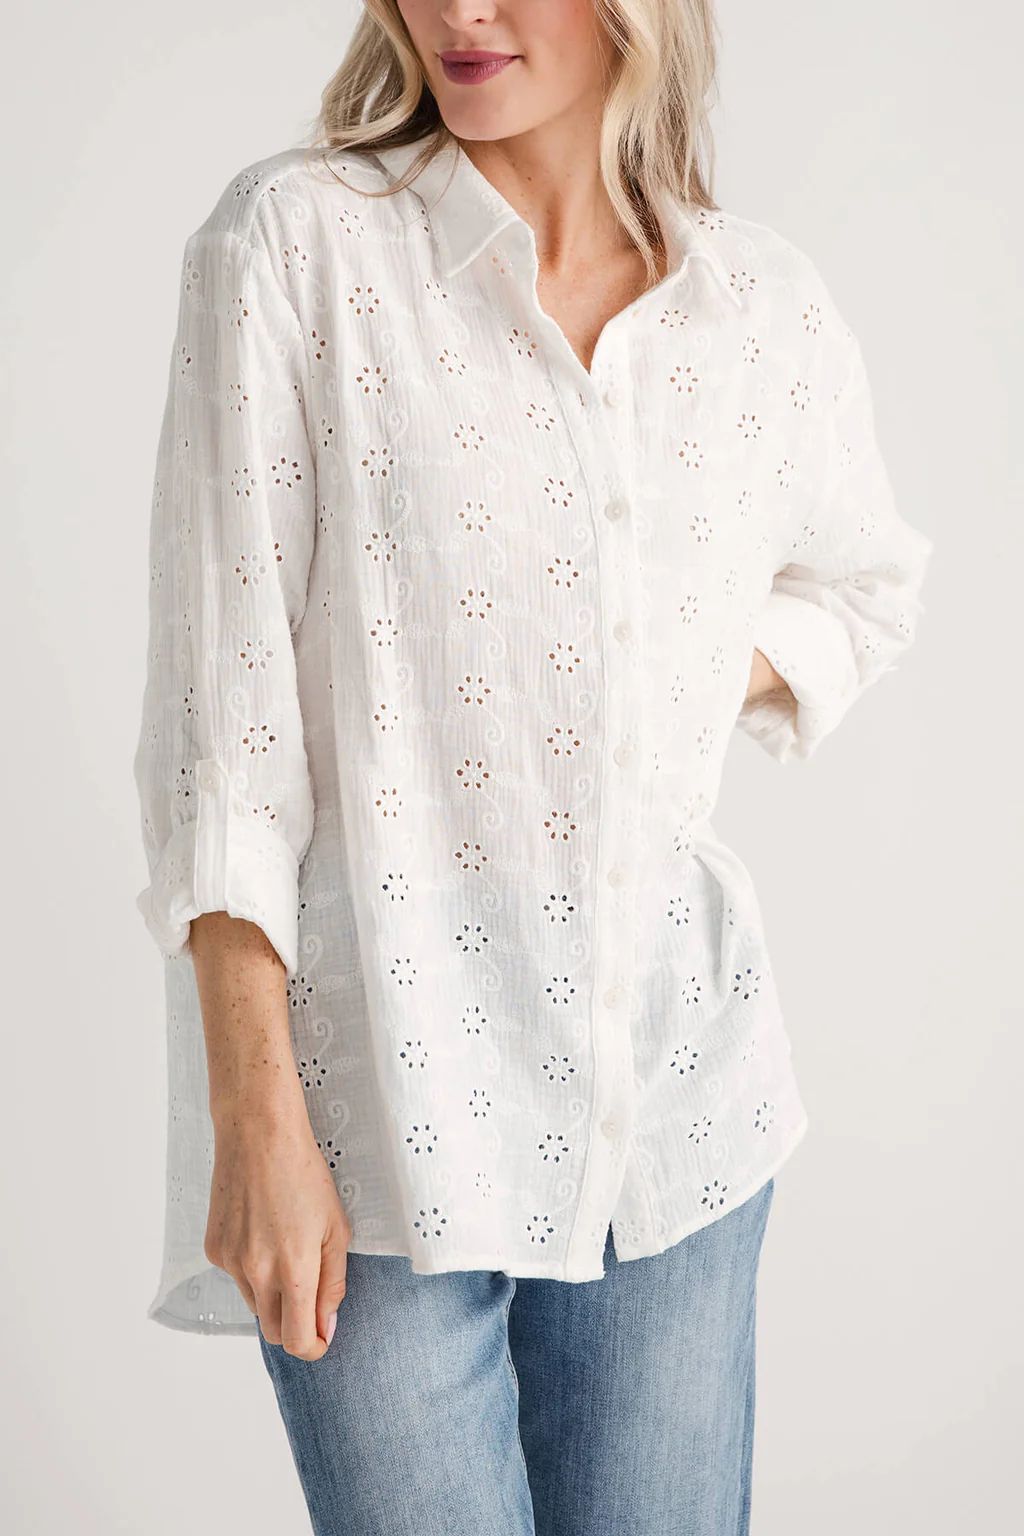 Lovestitch Eyelet Embroidered Button Down Top | Social Threads